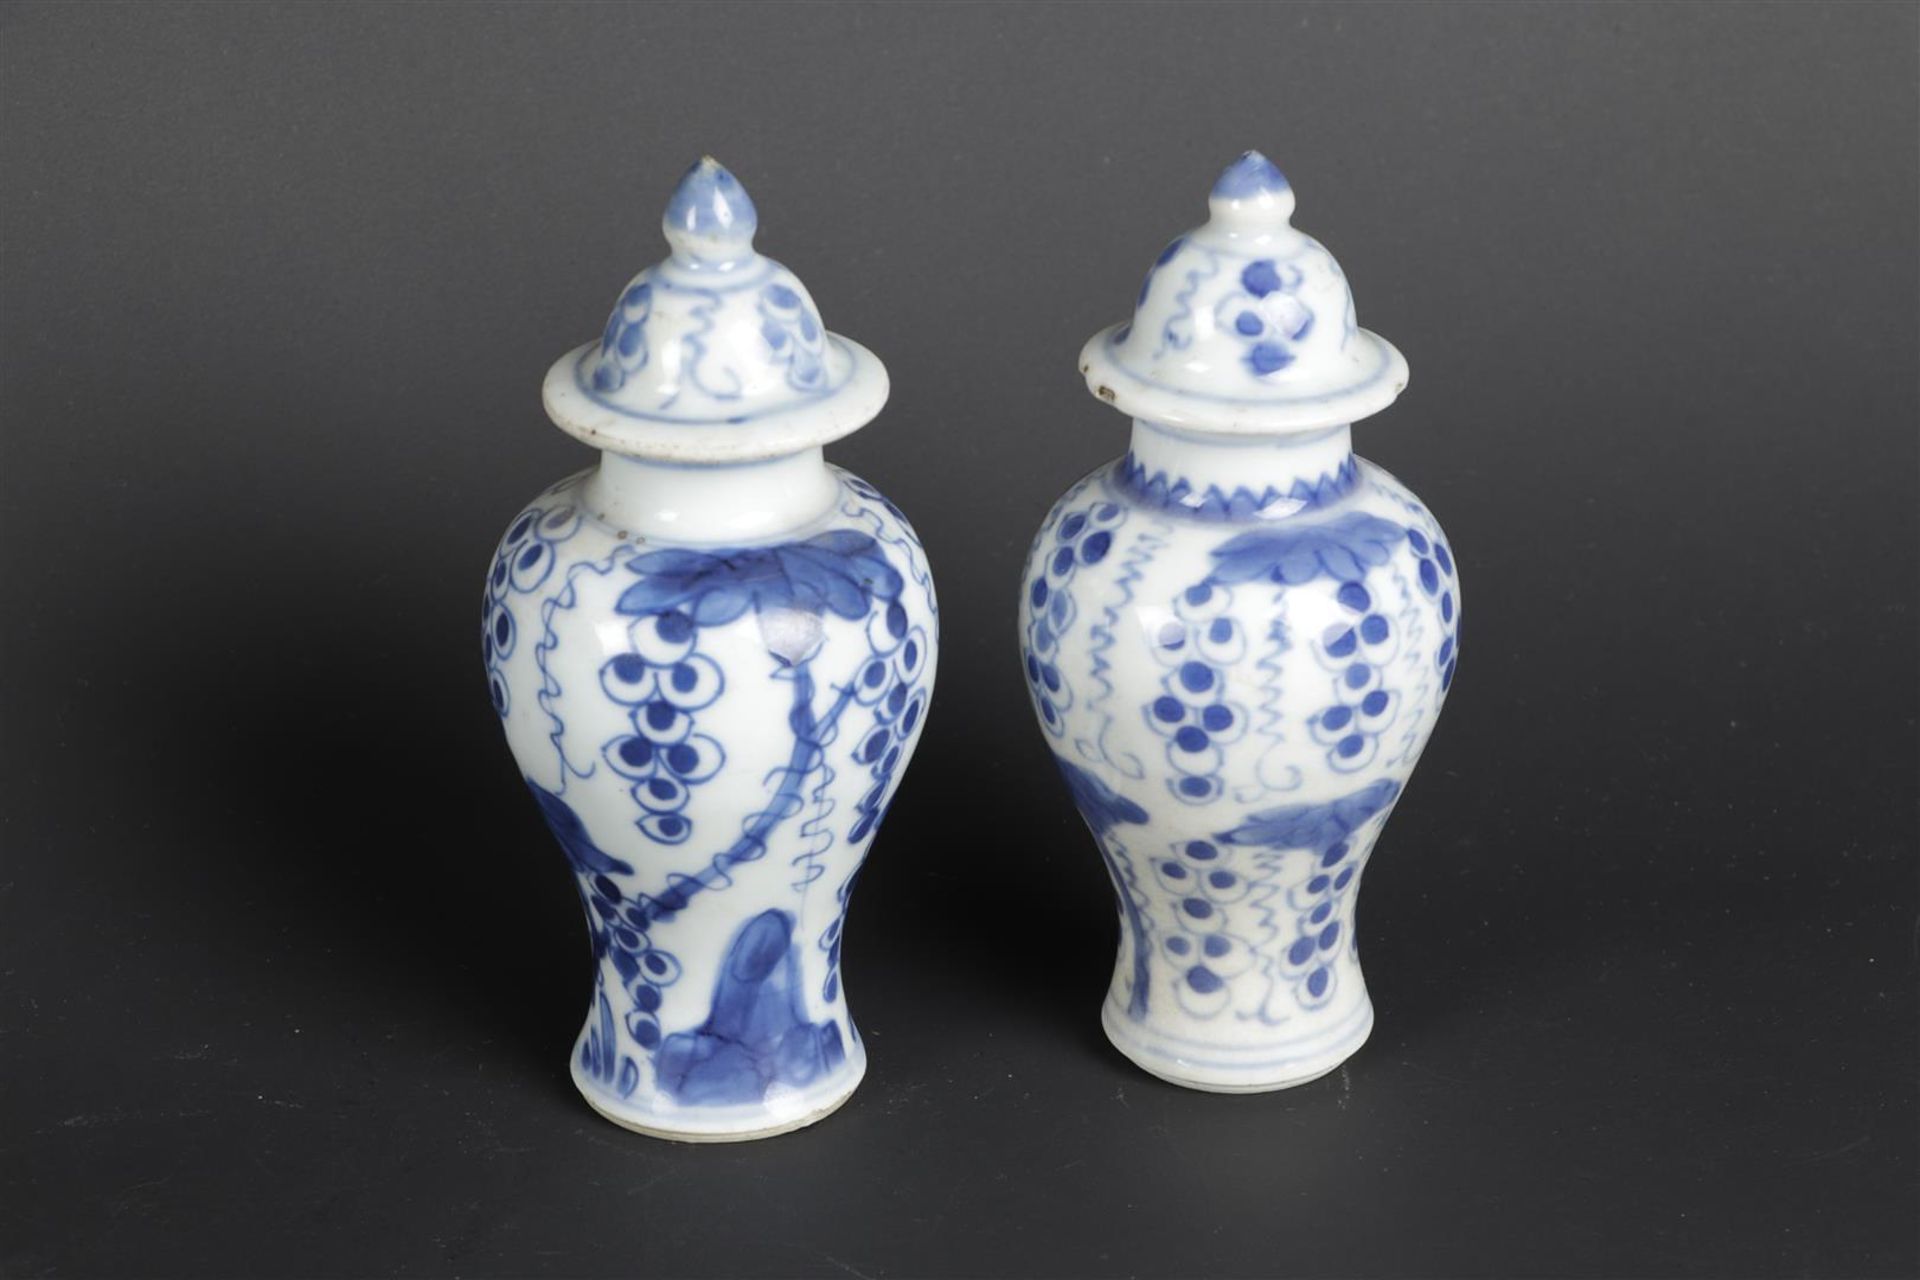 Two porcelain lidded vases with a so-called grape-on-vine decor. China, Qianlong.